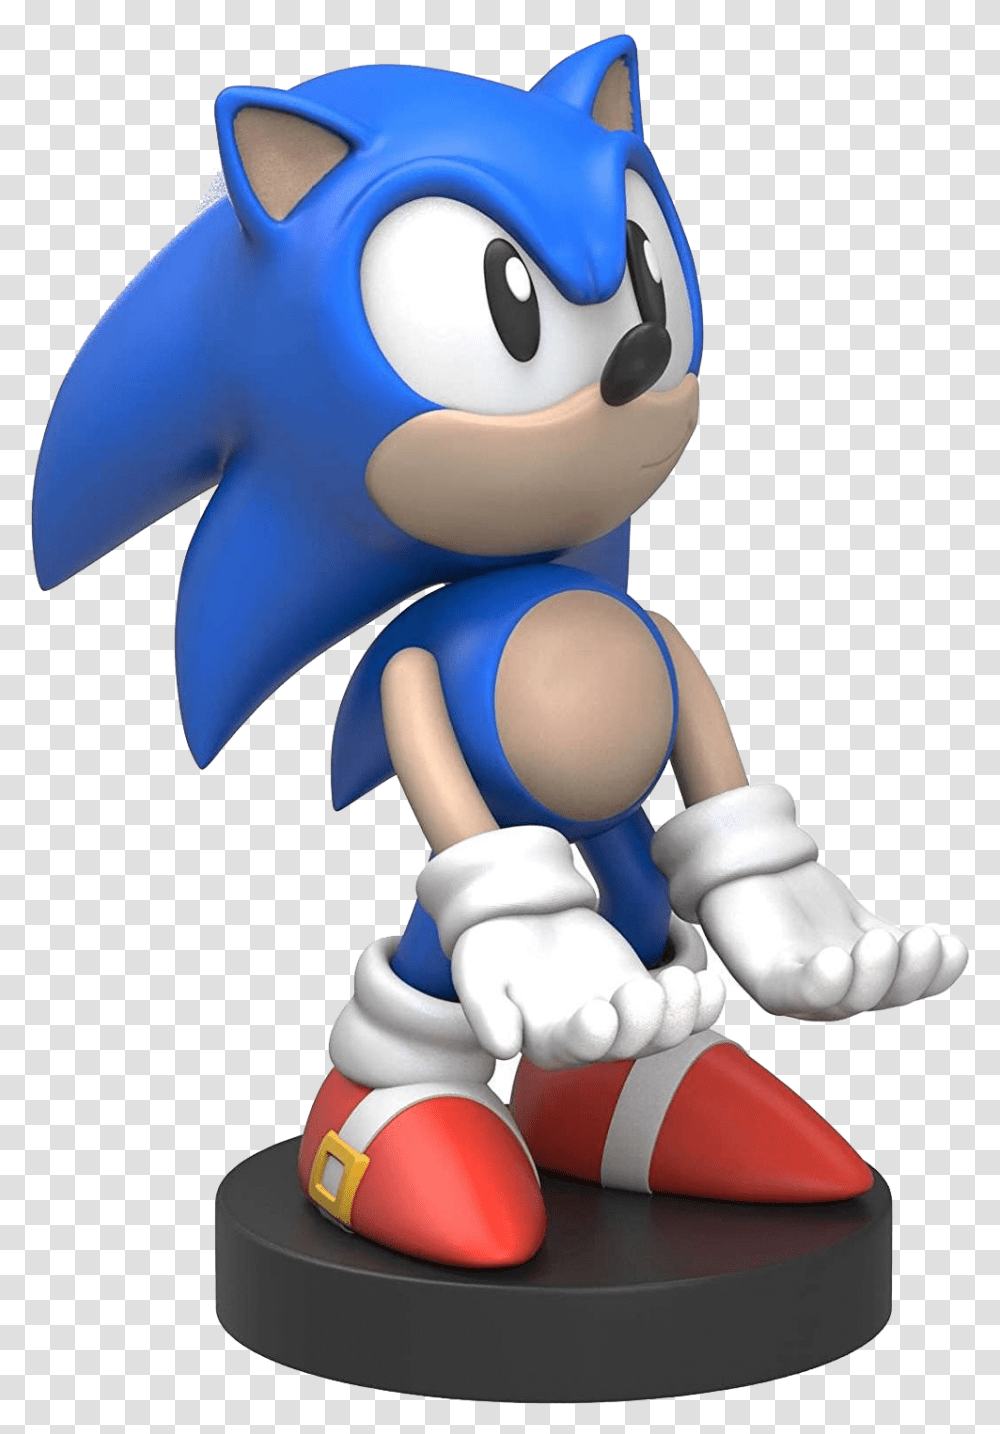 Sonic The Hedgehog Free Images Cable Guy Sonic, Toy, Figurine, Apparel Transparent Png